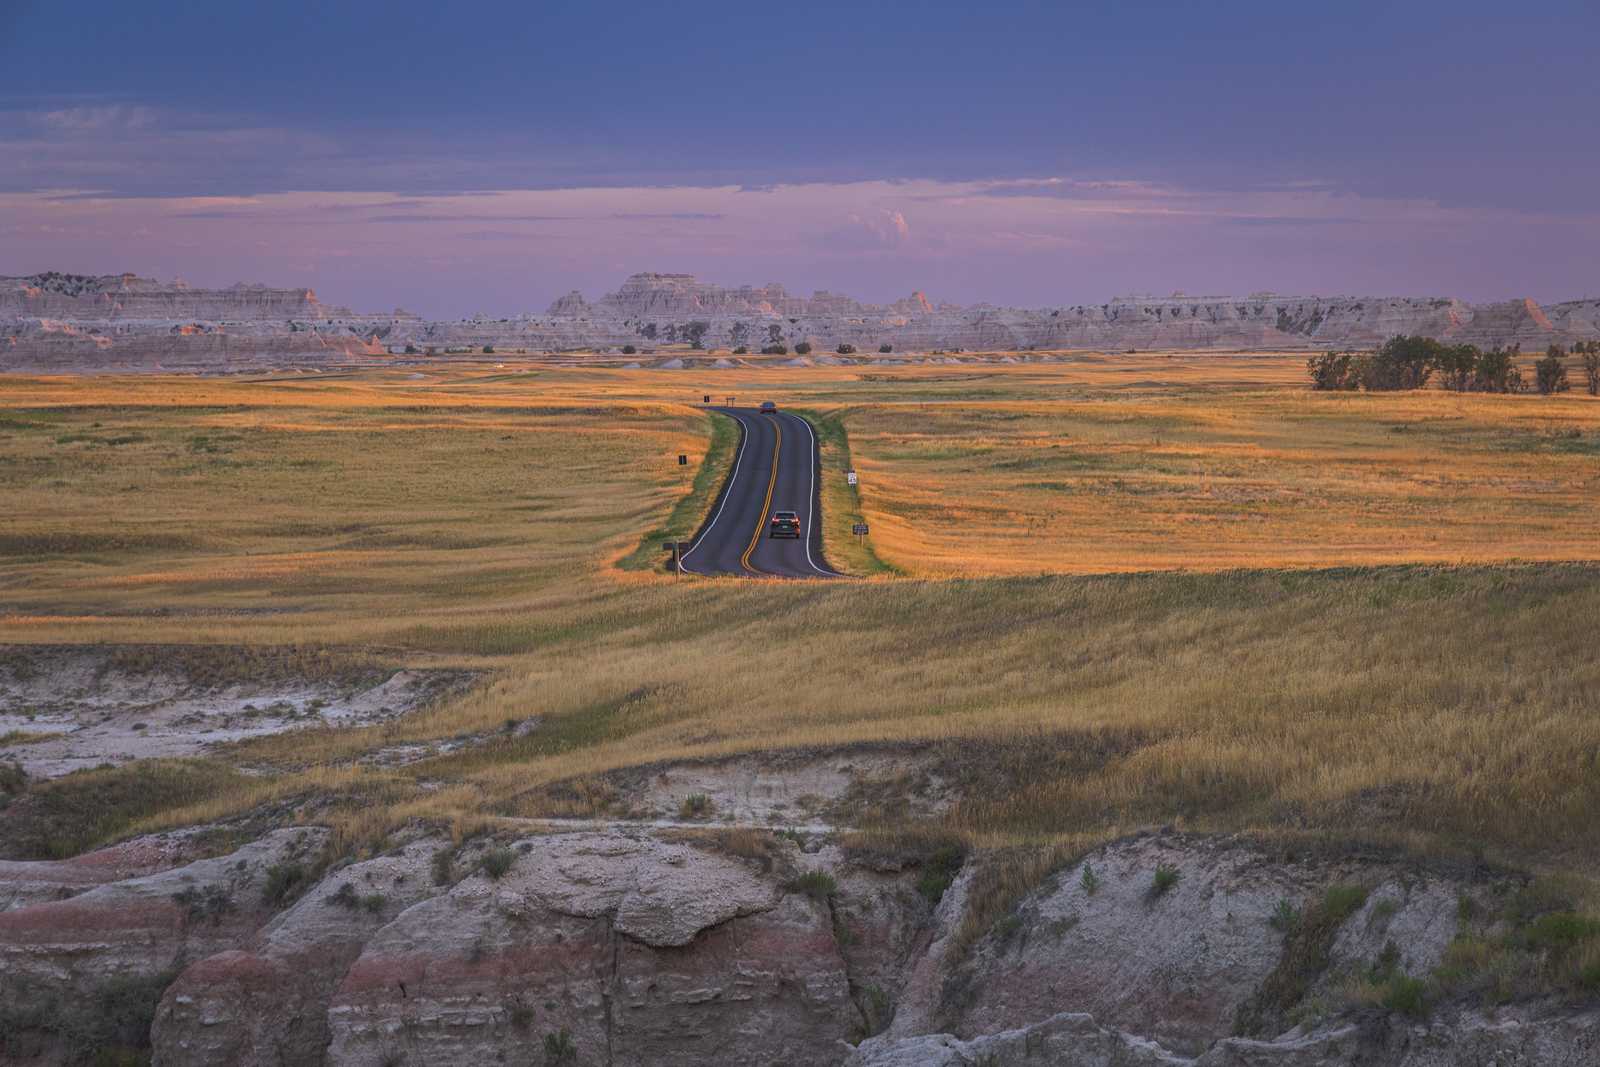 The main road in the park takes a turn, giving the viewer a sightline directly down the road as a single car drives into the park at sundown. The grasslands on either side of the road are lit with diffuse light, and the sky behind above rocky hills is a subtle purple-blue